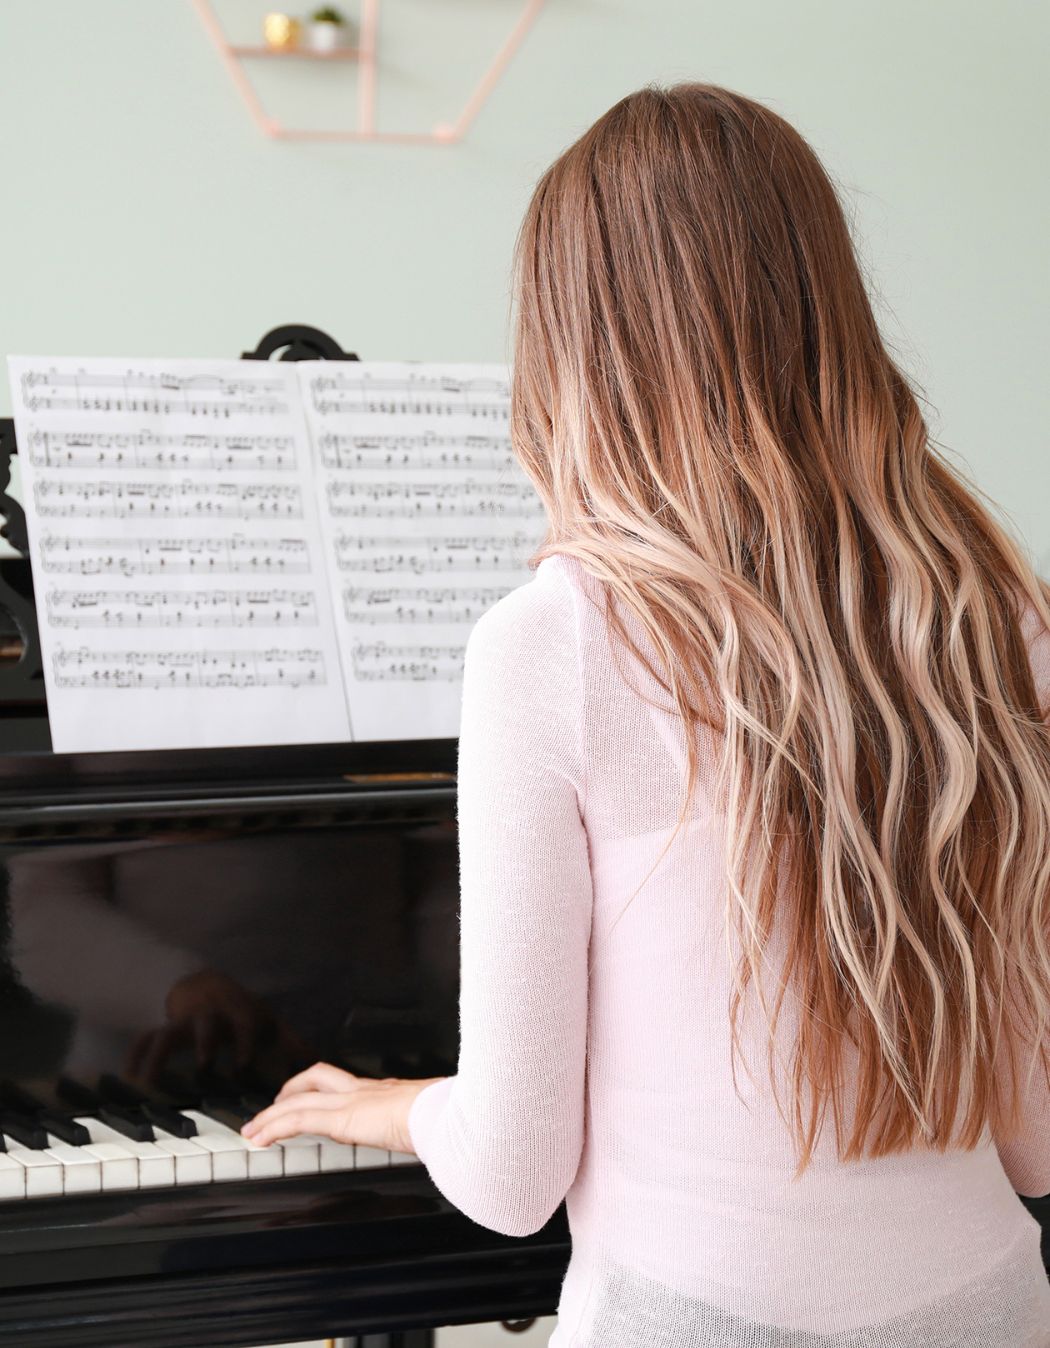 A woman plays a large, dark wood piano, with her back to the camera. For Blog: The future of the financial planning profession